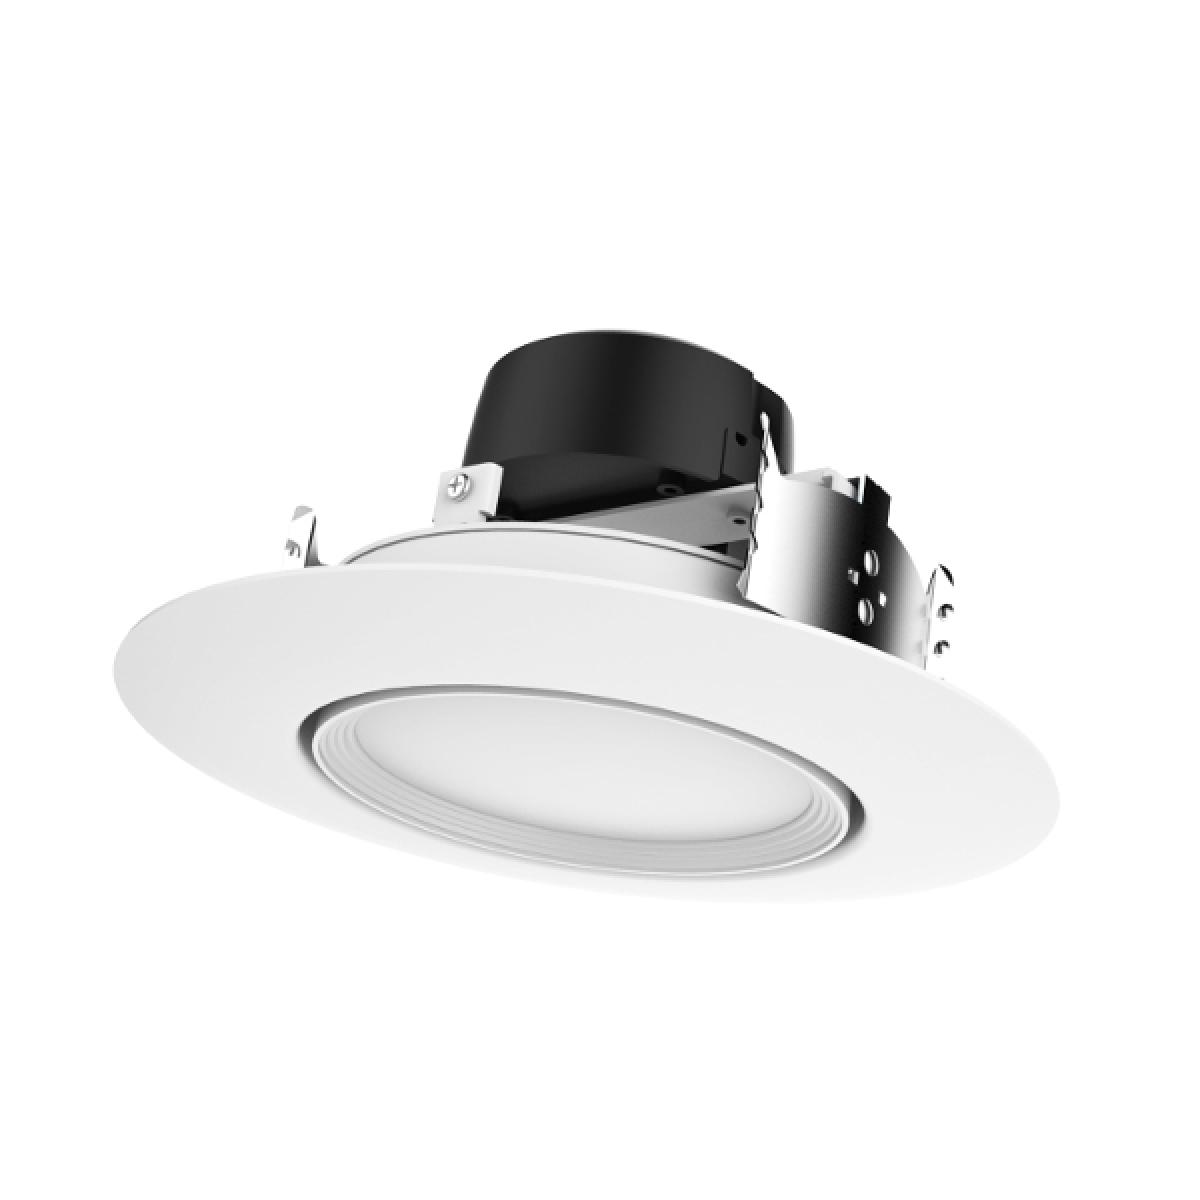 Cree LED Recessed Luminaire LR6 2700-K Incandescent 6 inch Directional EyeBall